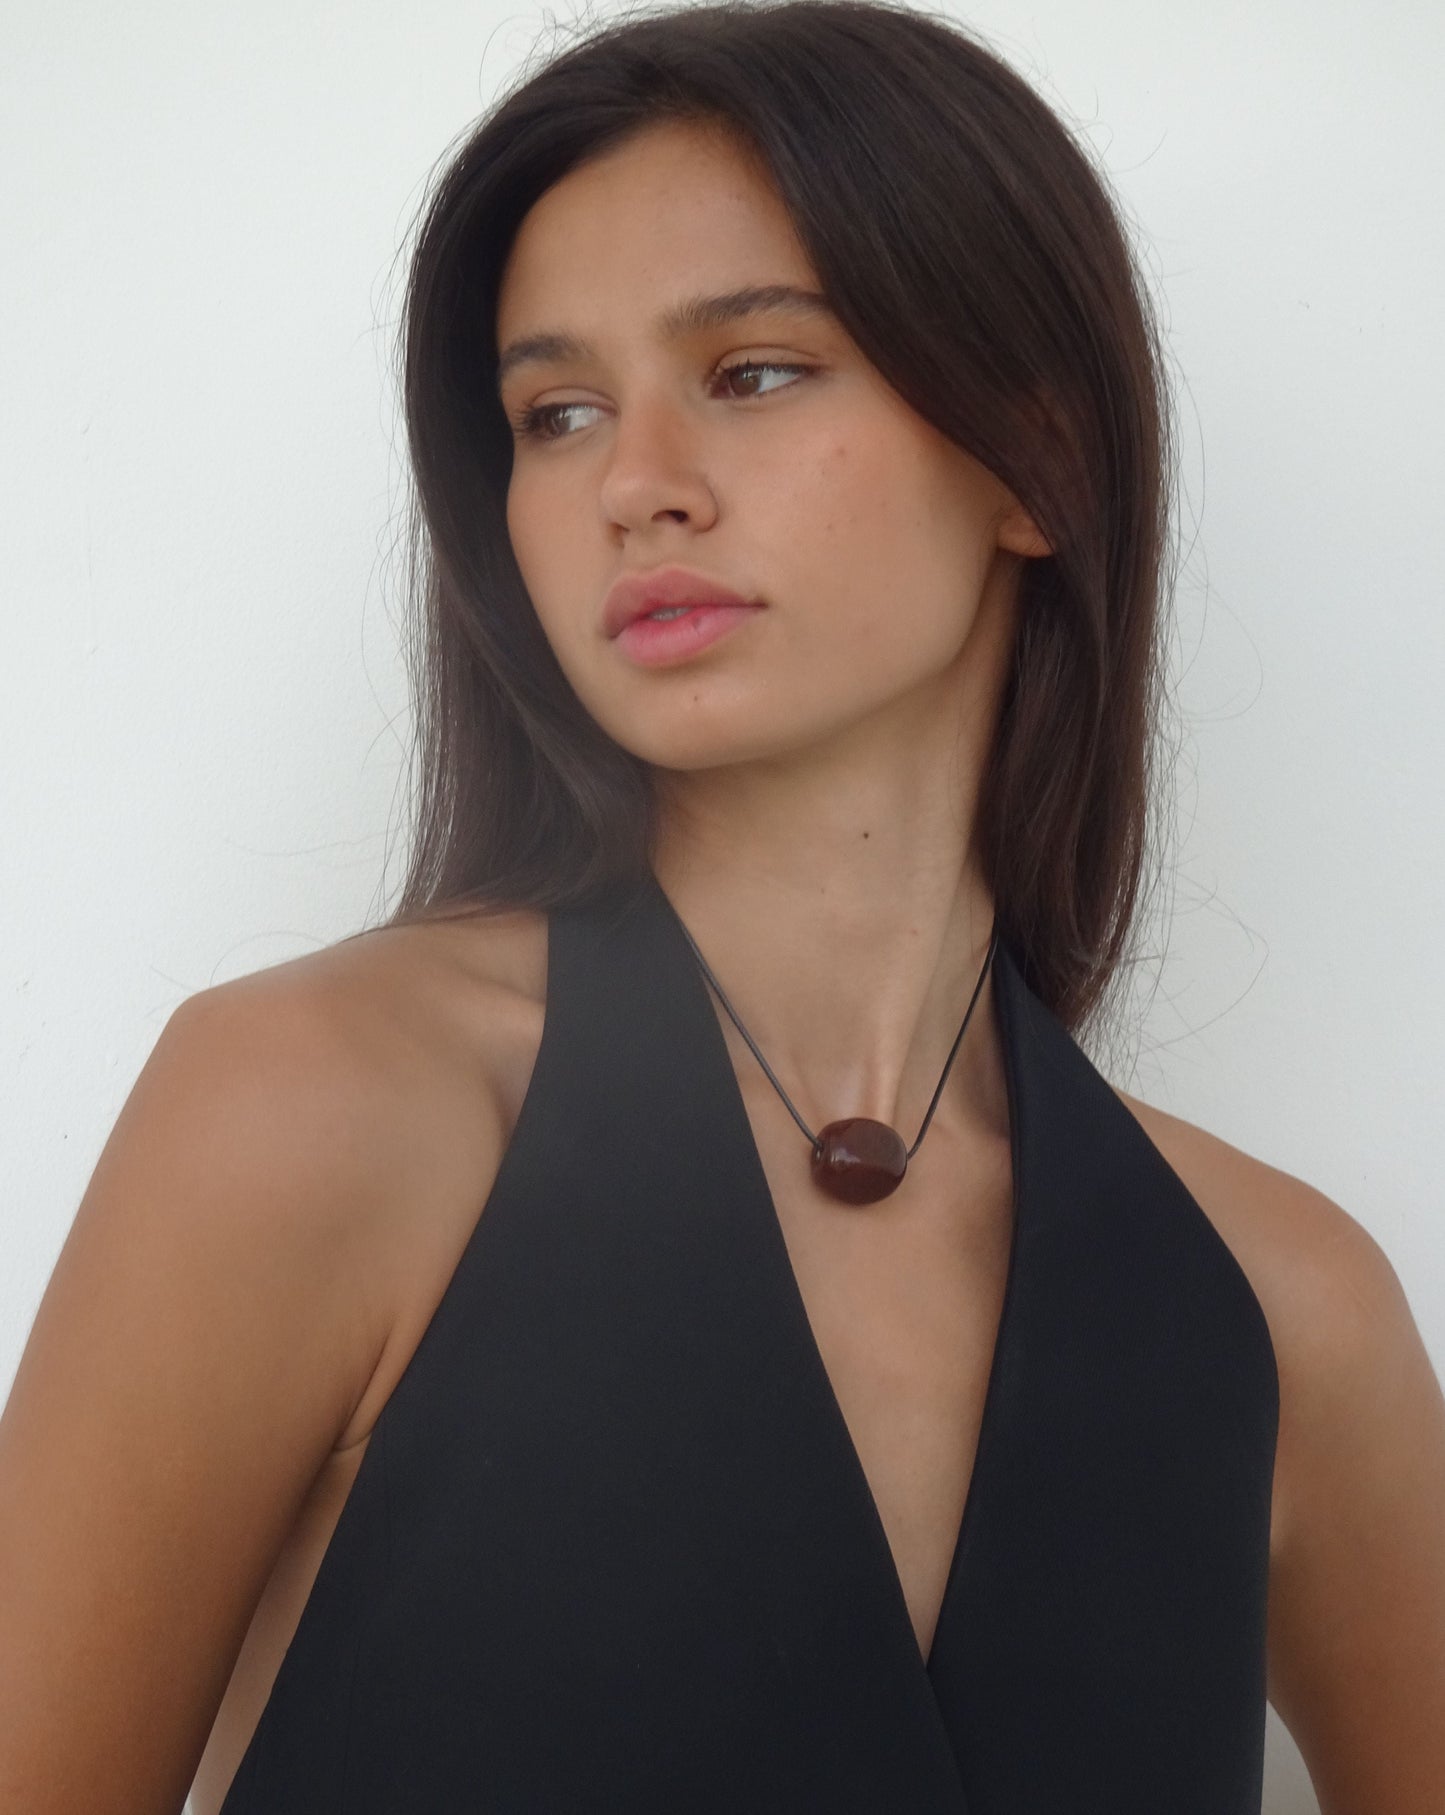 BROWN GLASS CUBE NECKLACE